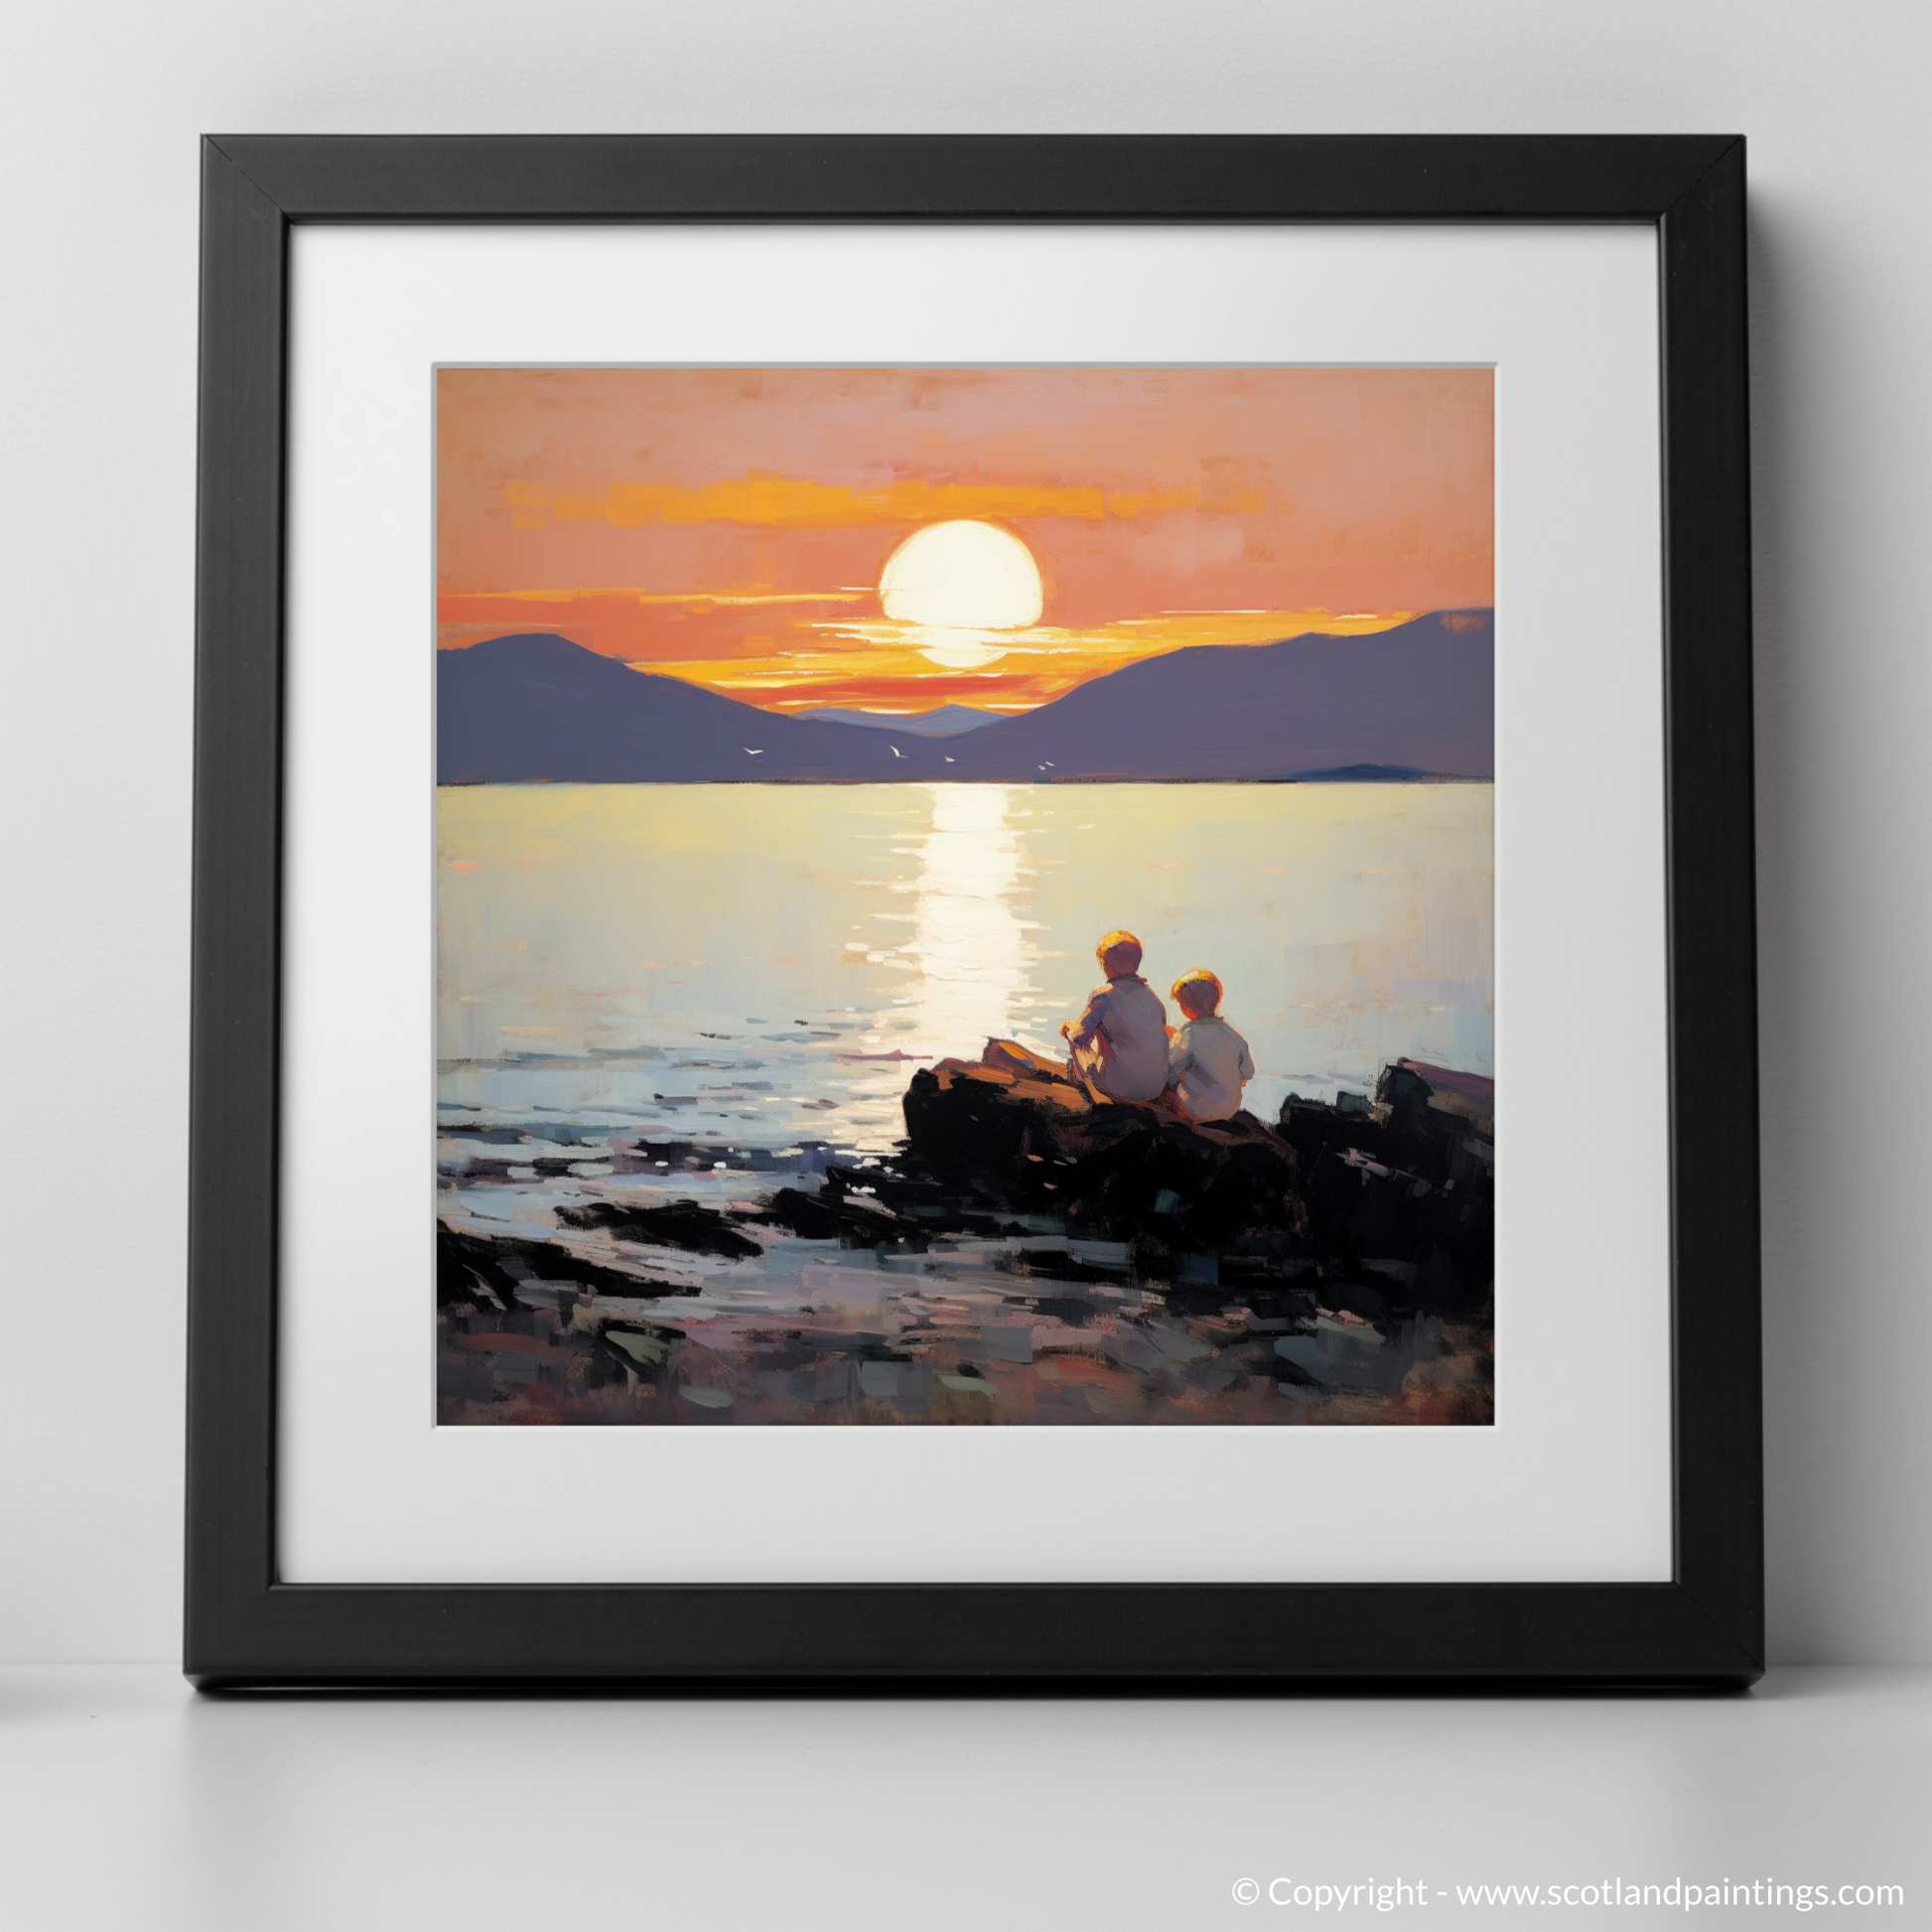 Art Print of Young explorers watching the sunset over the Isle of Arran from the peaceful Saltcoats Beach with a black frame